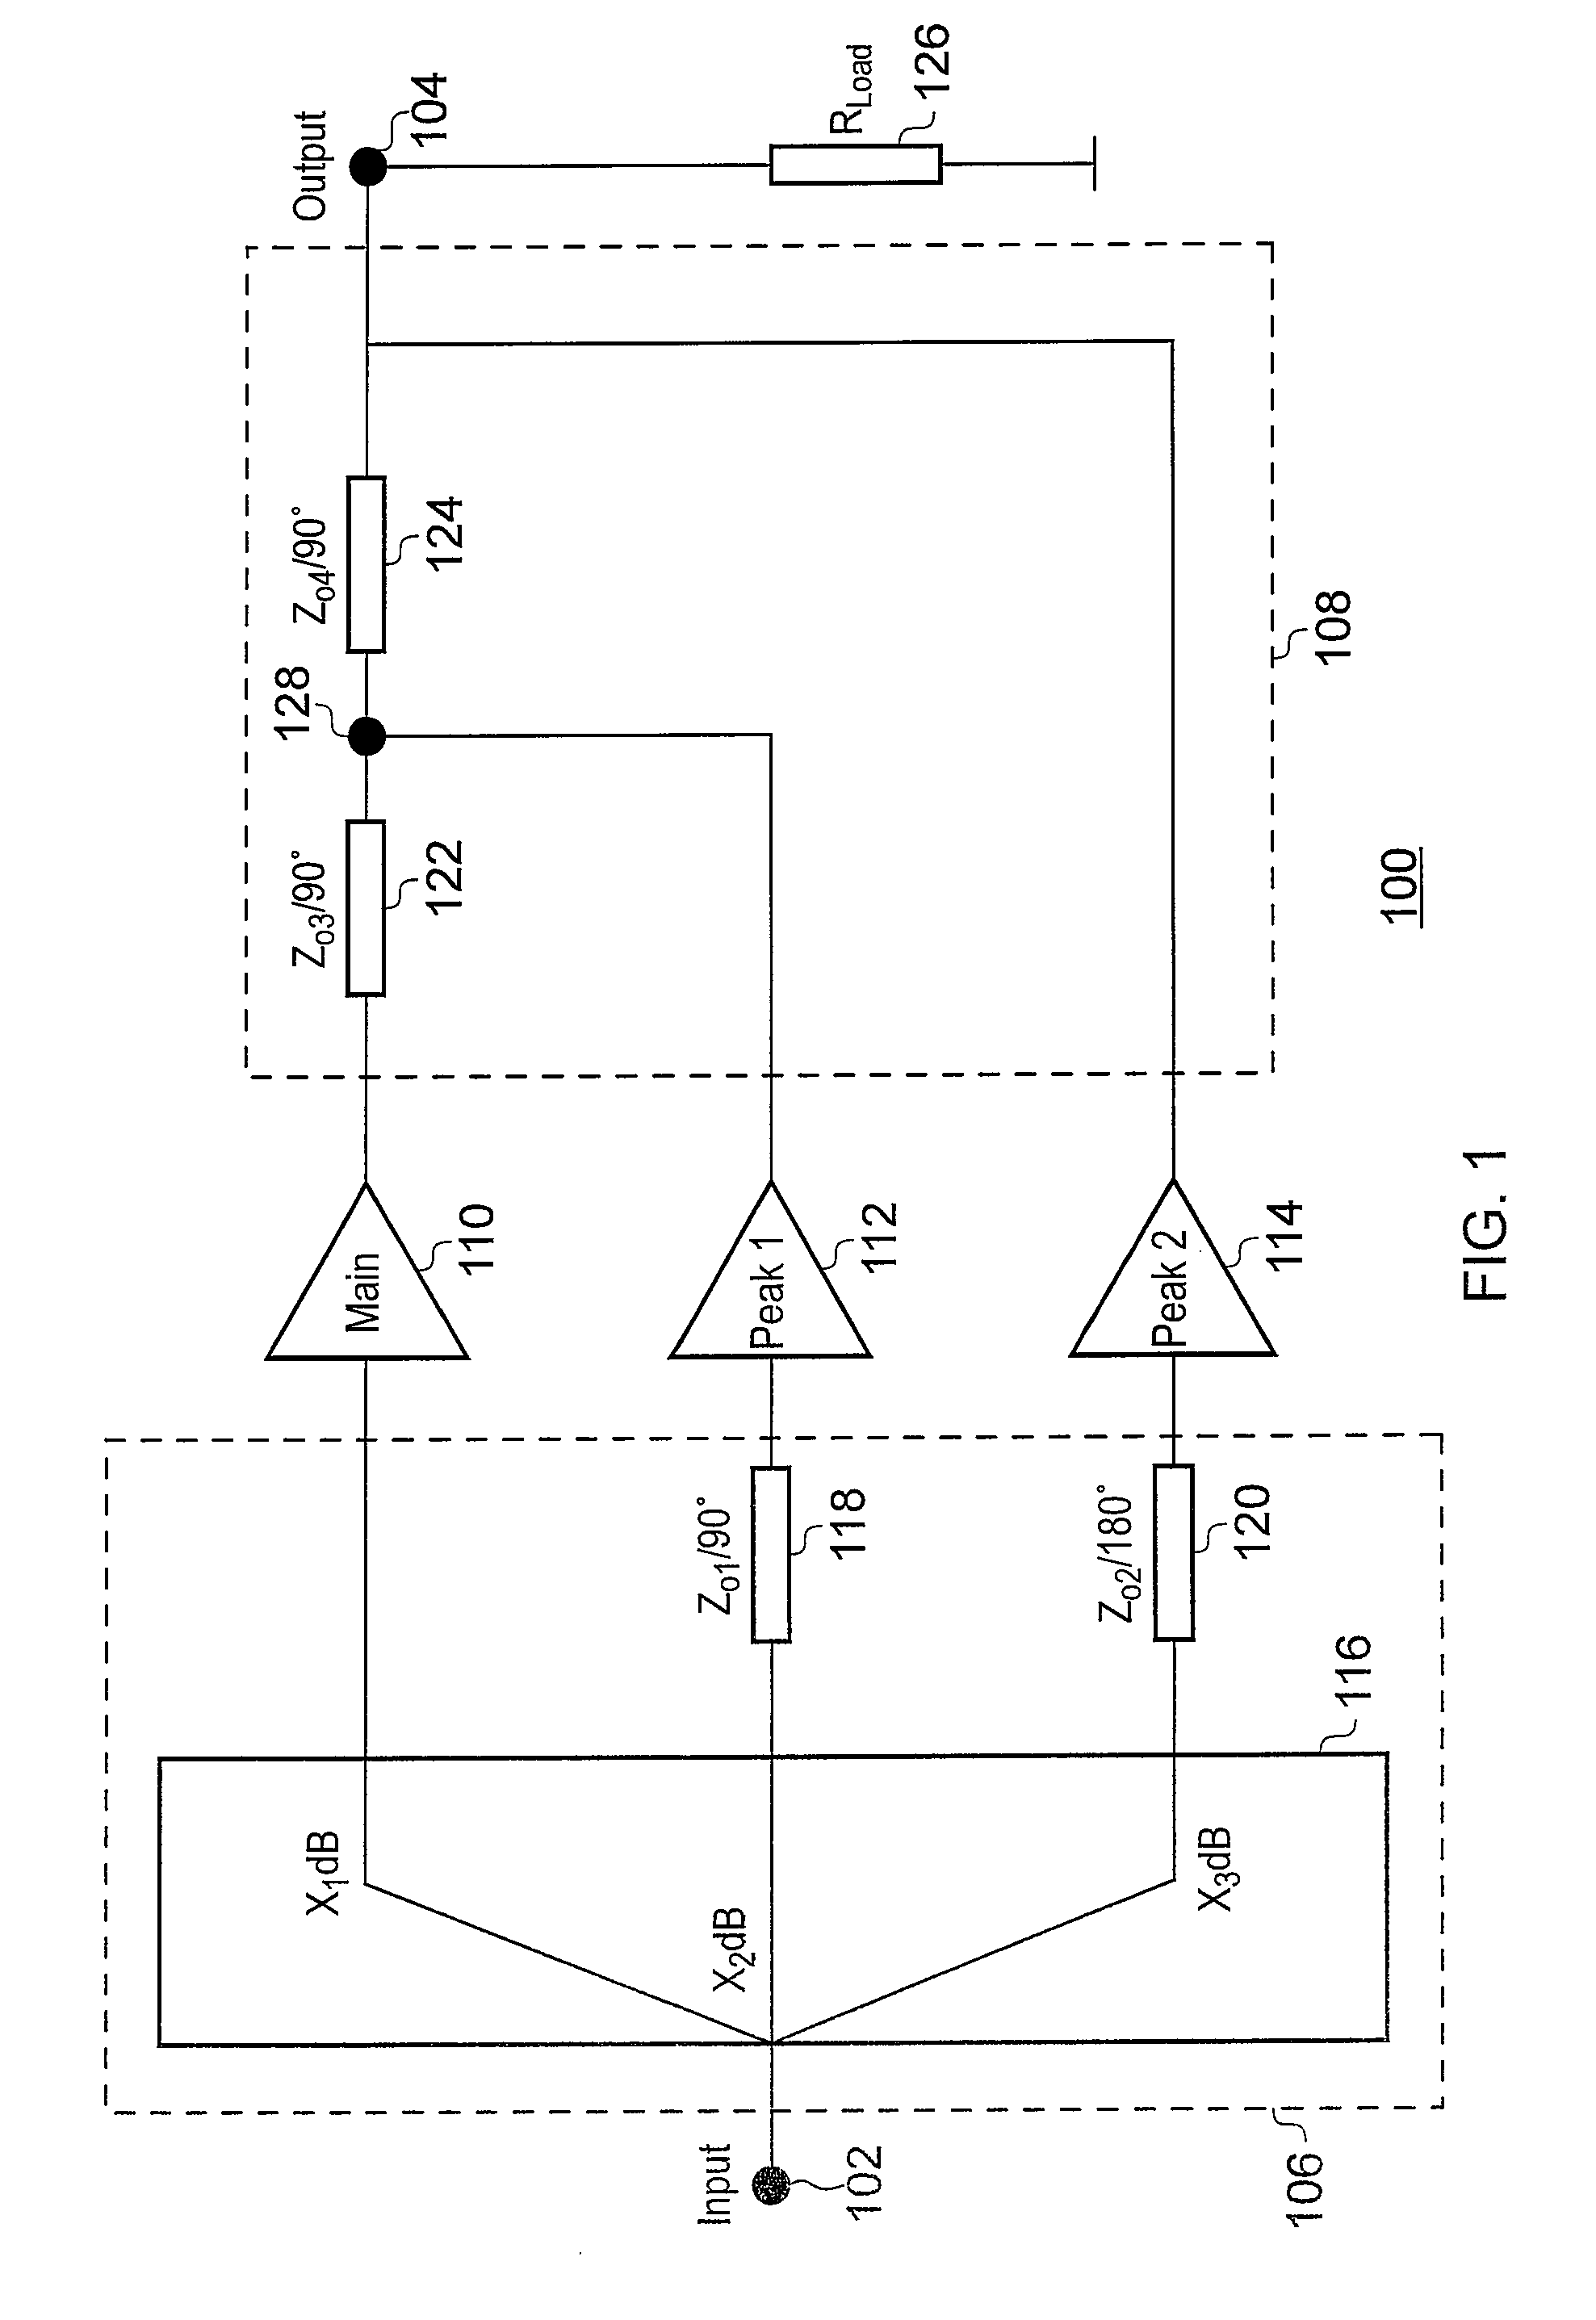 3-way Doherty amplifier with minimum output network